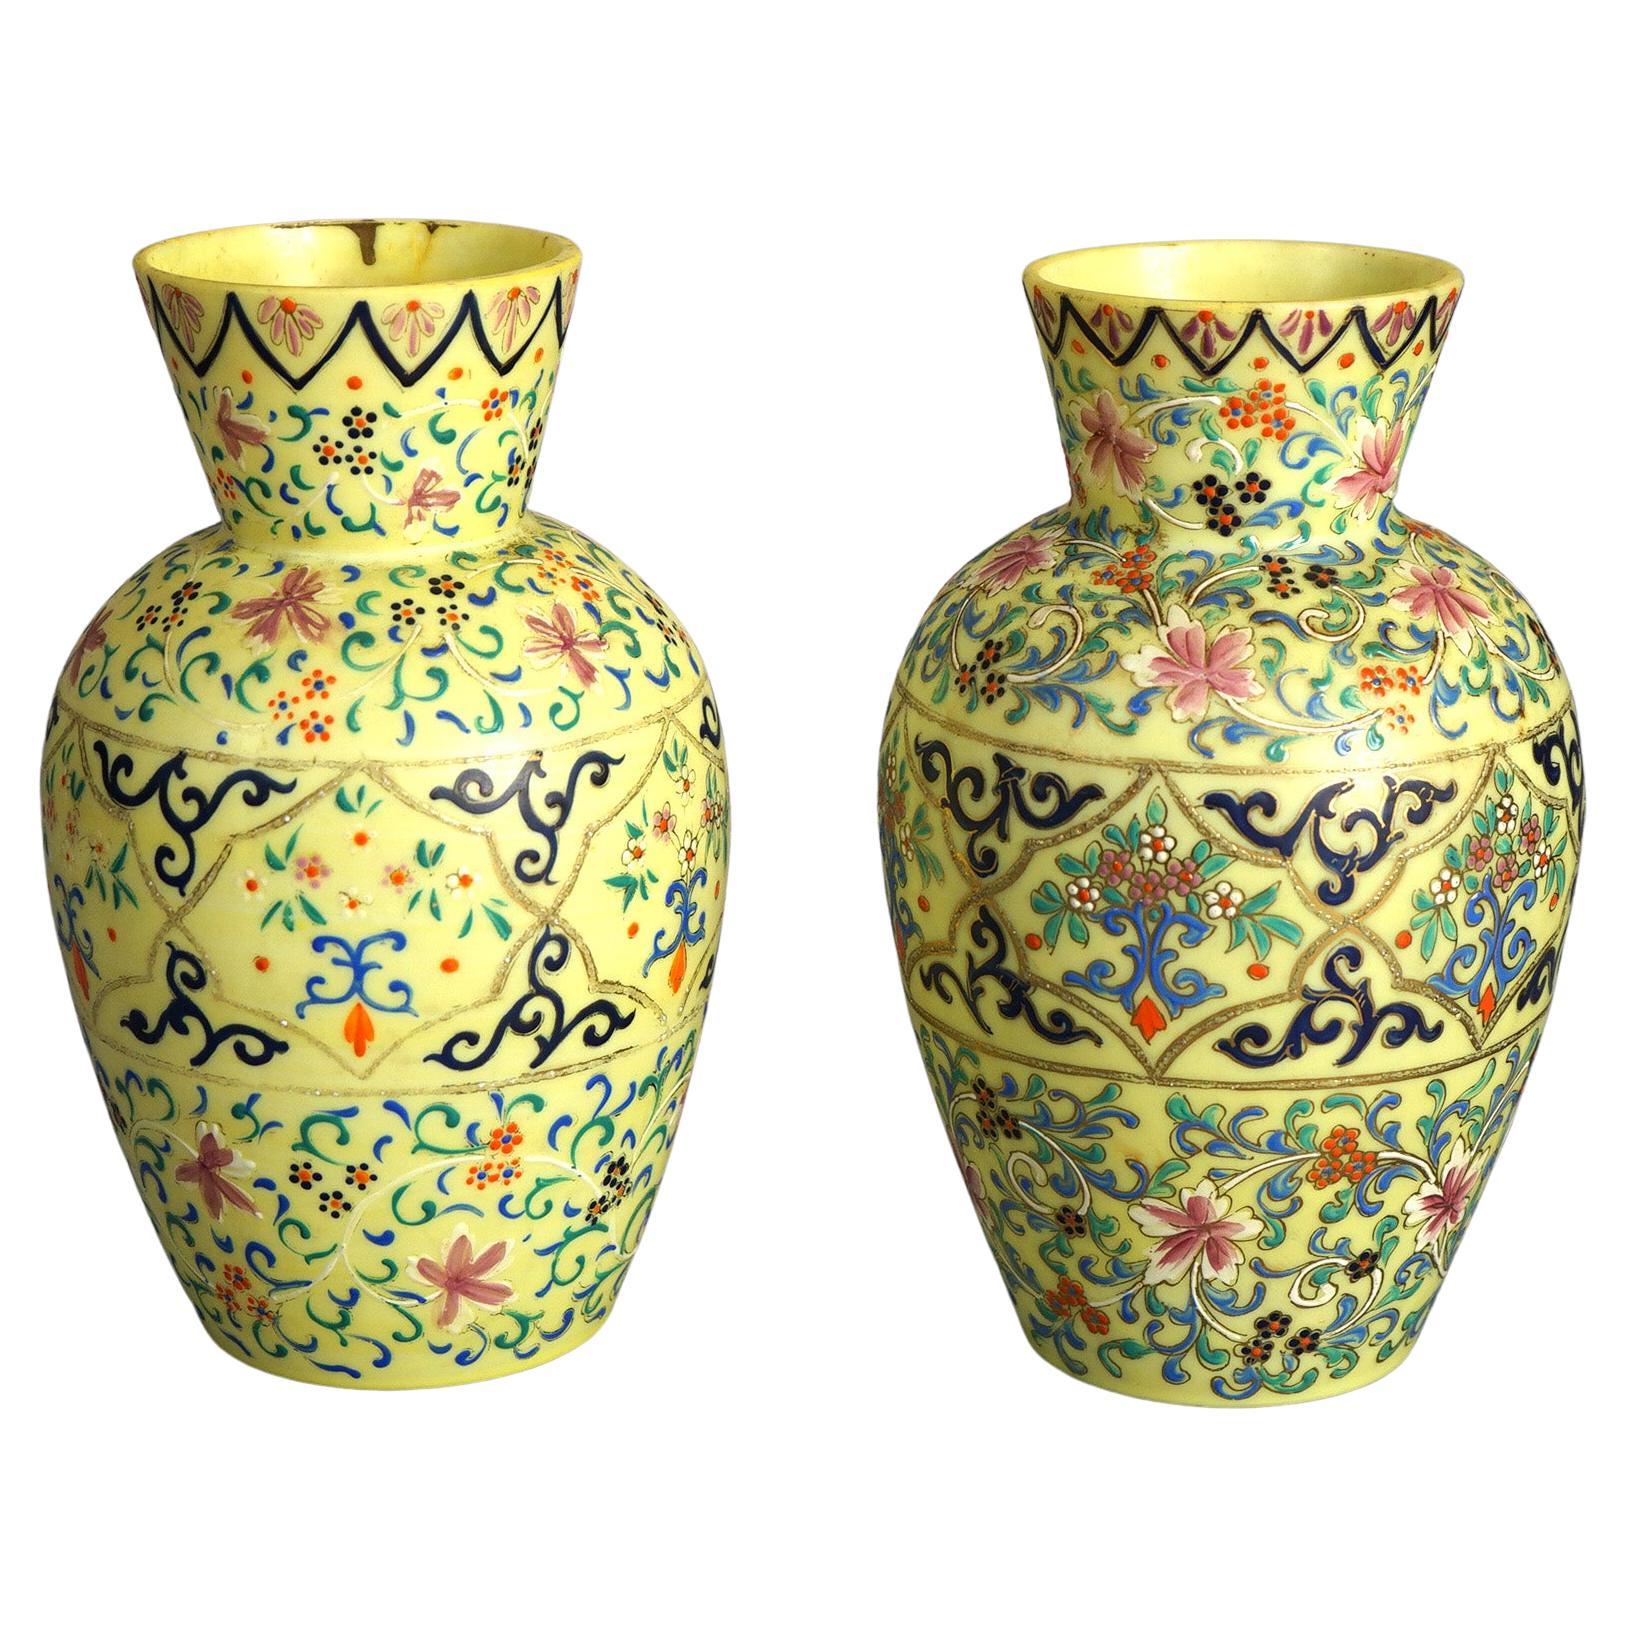 Antique Pair Opaline Enamel Decorated Art Glass Vases with Floral & Scroll Elements, C1900

Measures - 8.5